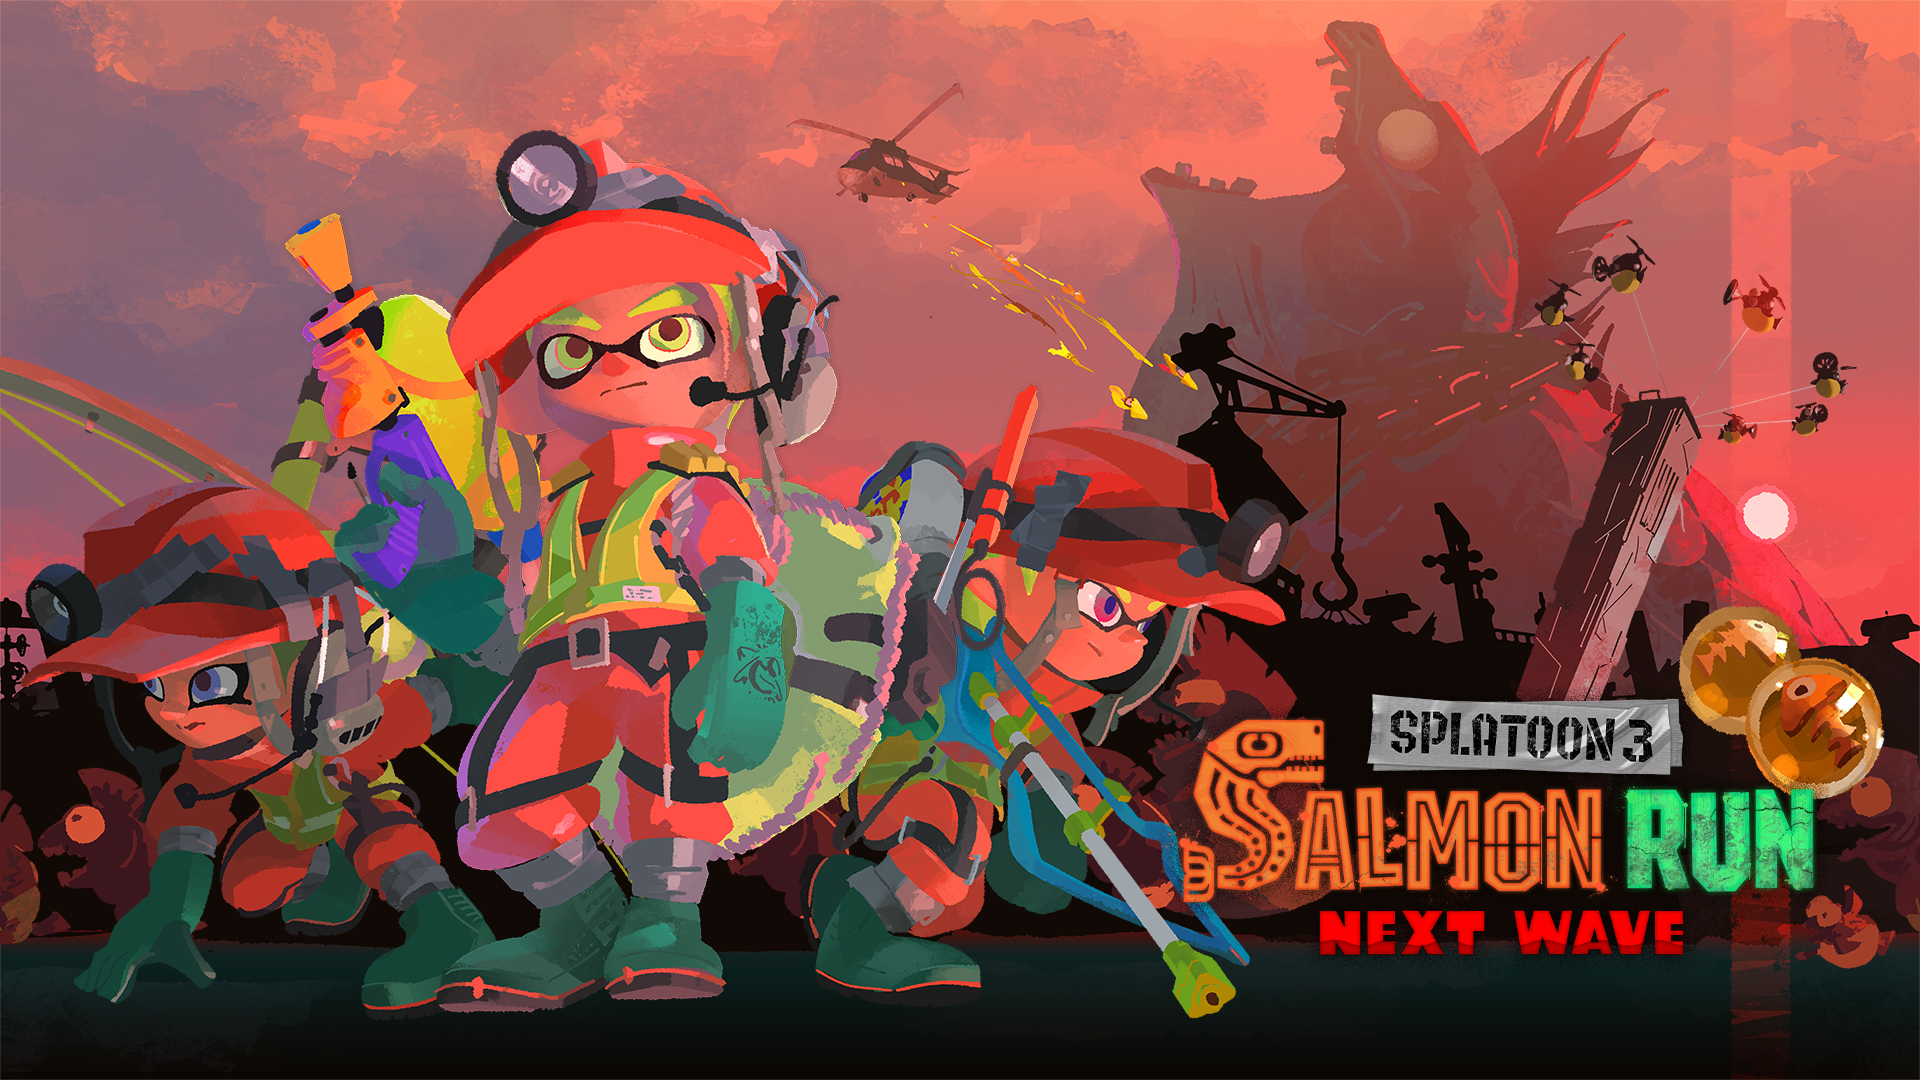 Check out the latest Splatoon 3 trailer. The Salmon Run co-op mode has been  confirmed | News & Updates | Nintendo